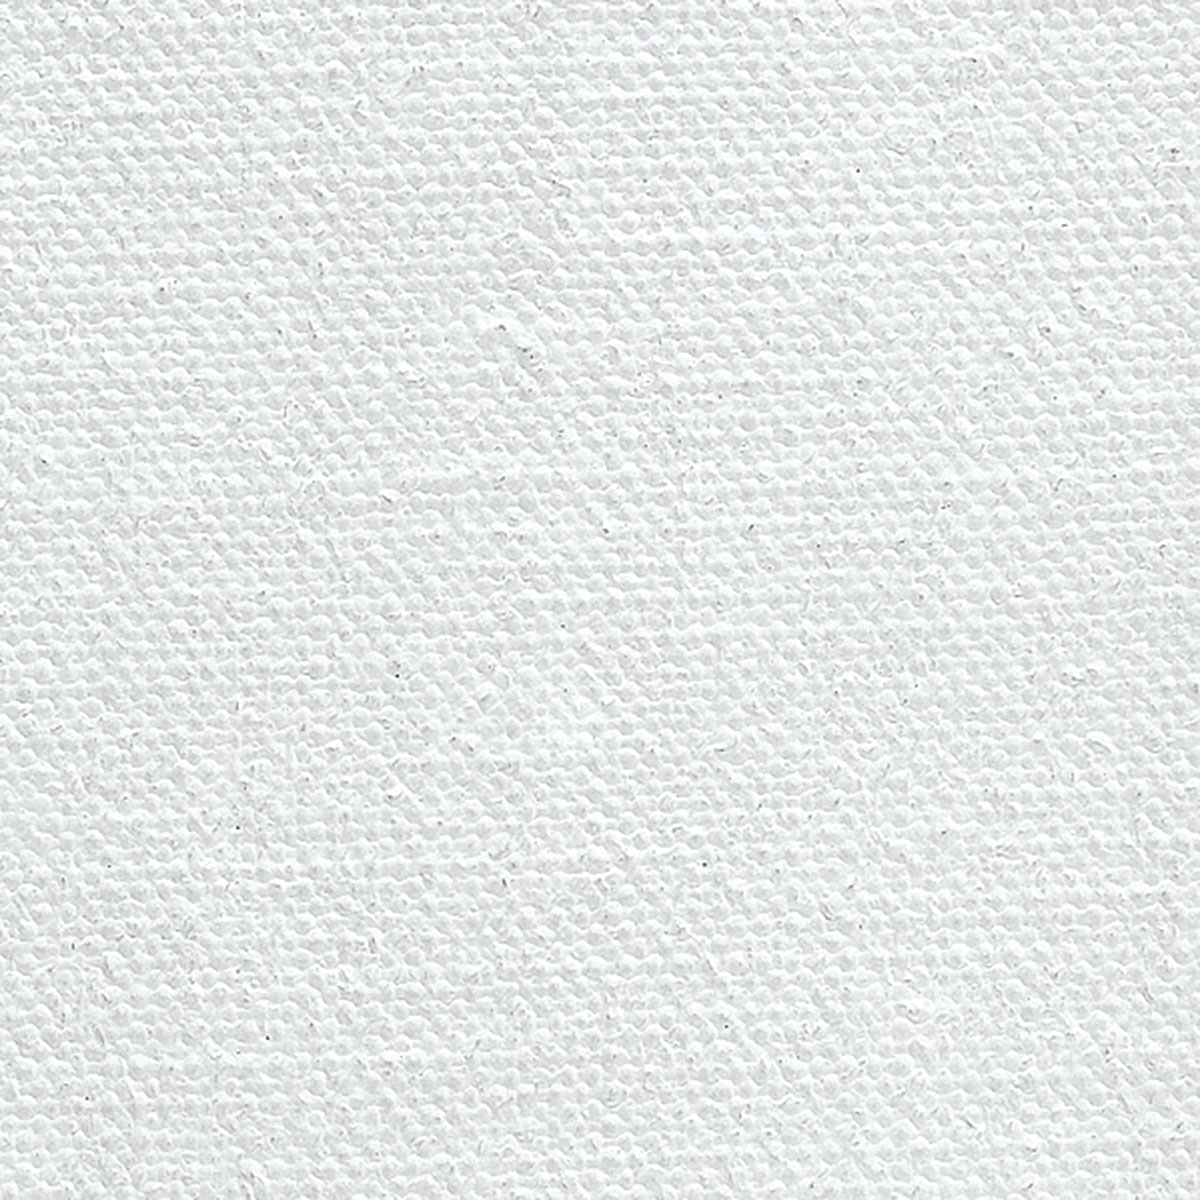 Canvas texture coated by white primer. Linen background Stock